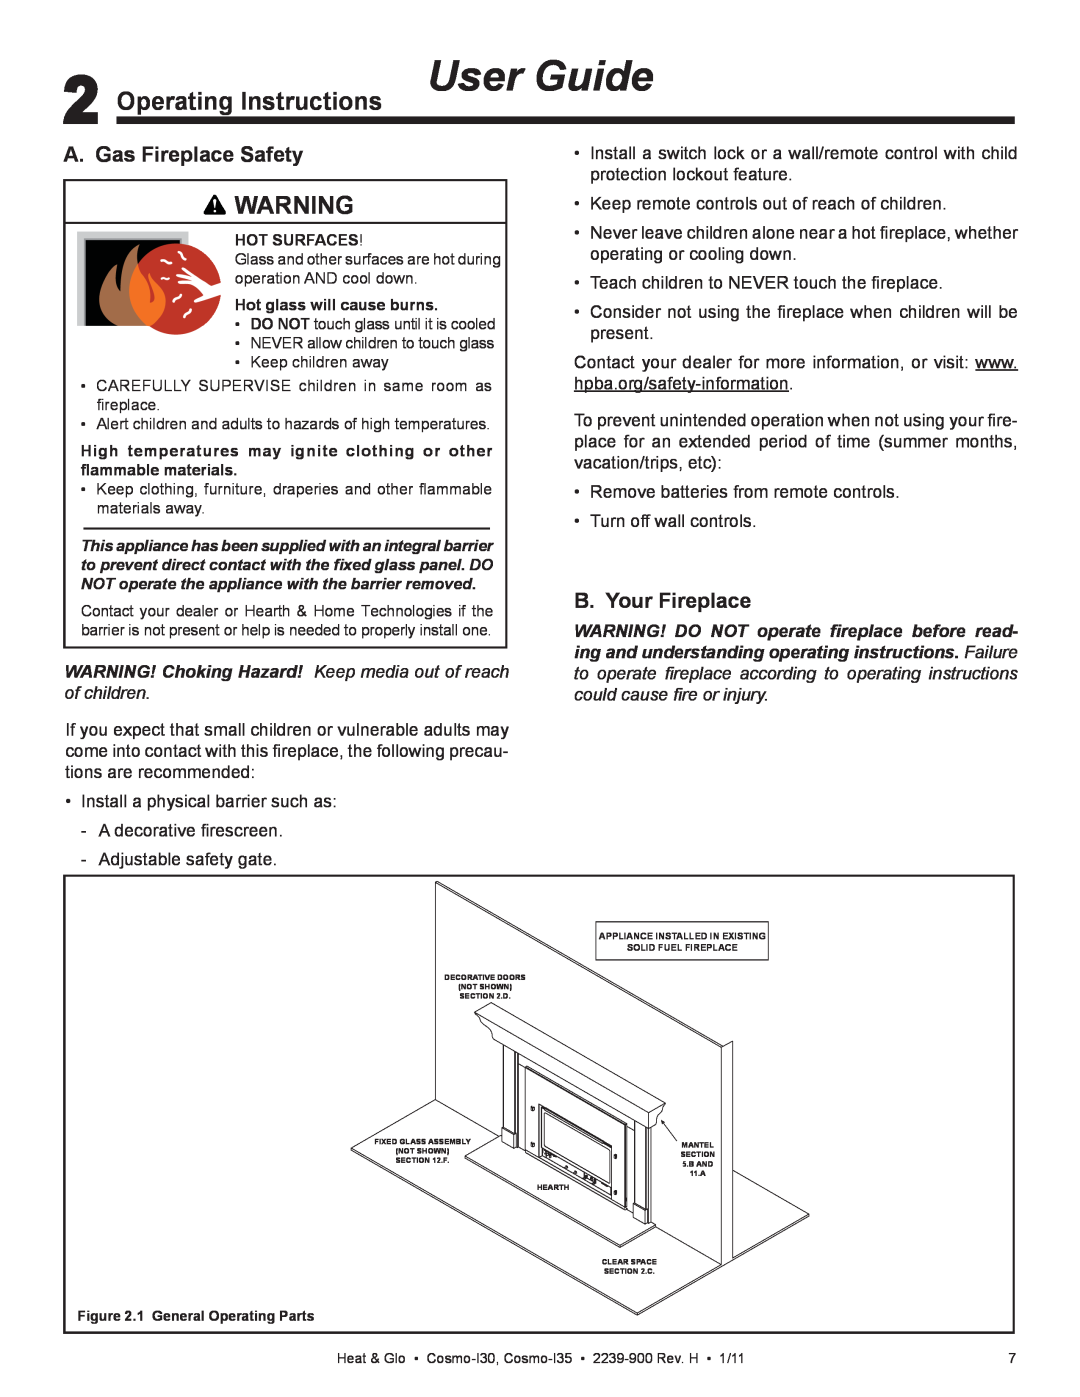 Heat & Glo LifeStyle Cosmo-130 owner manual Operating Instructions User Guide, A. Gas Fireplace Safety, B. Your Fireplace 